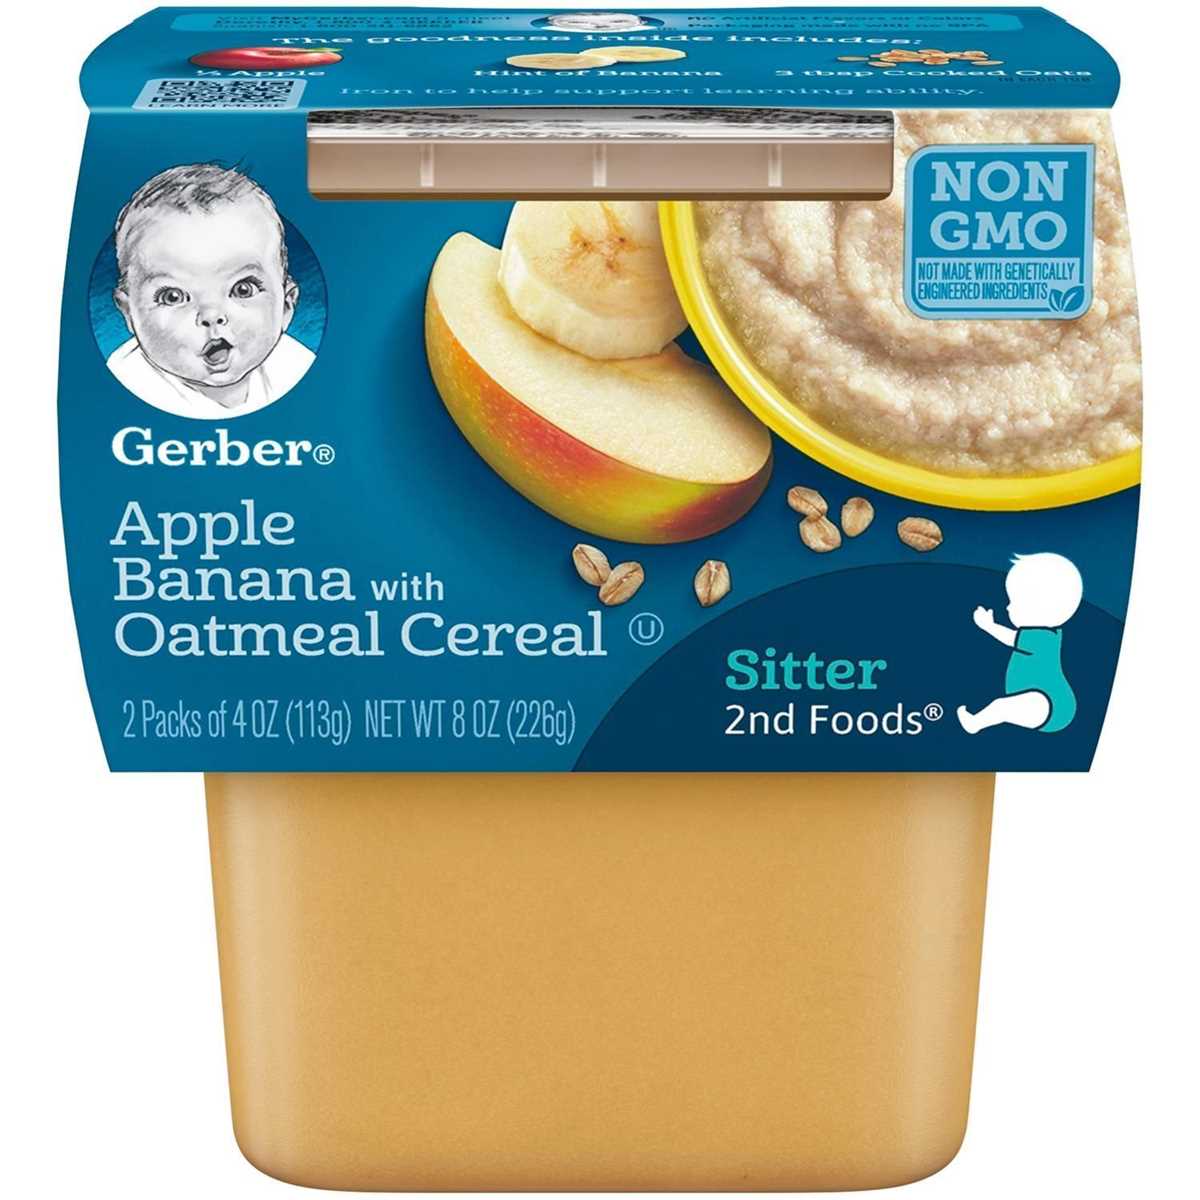 Gerber 2nd Foods for Sitter - Blended Fruits with Oatmeal